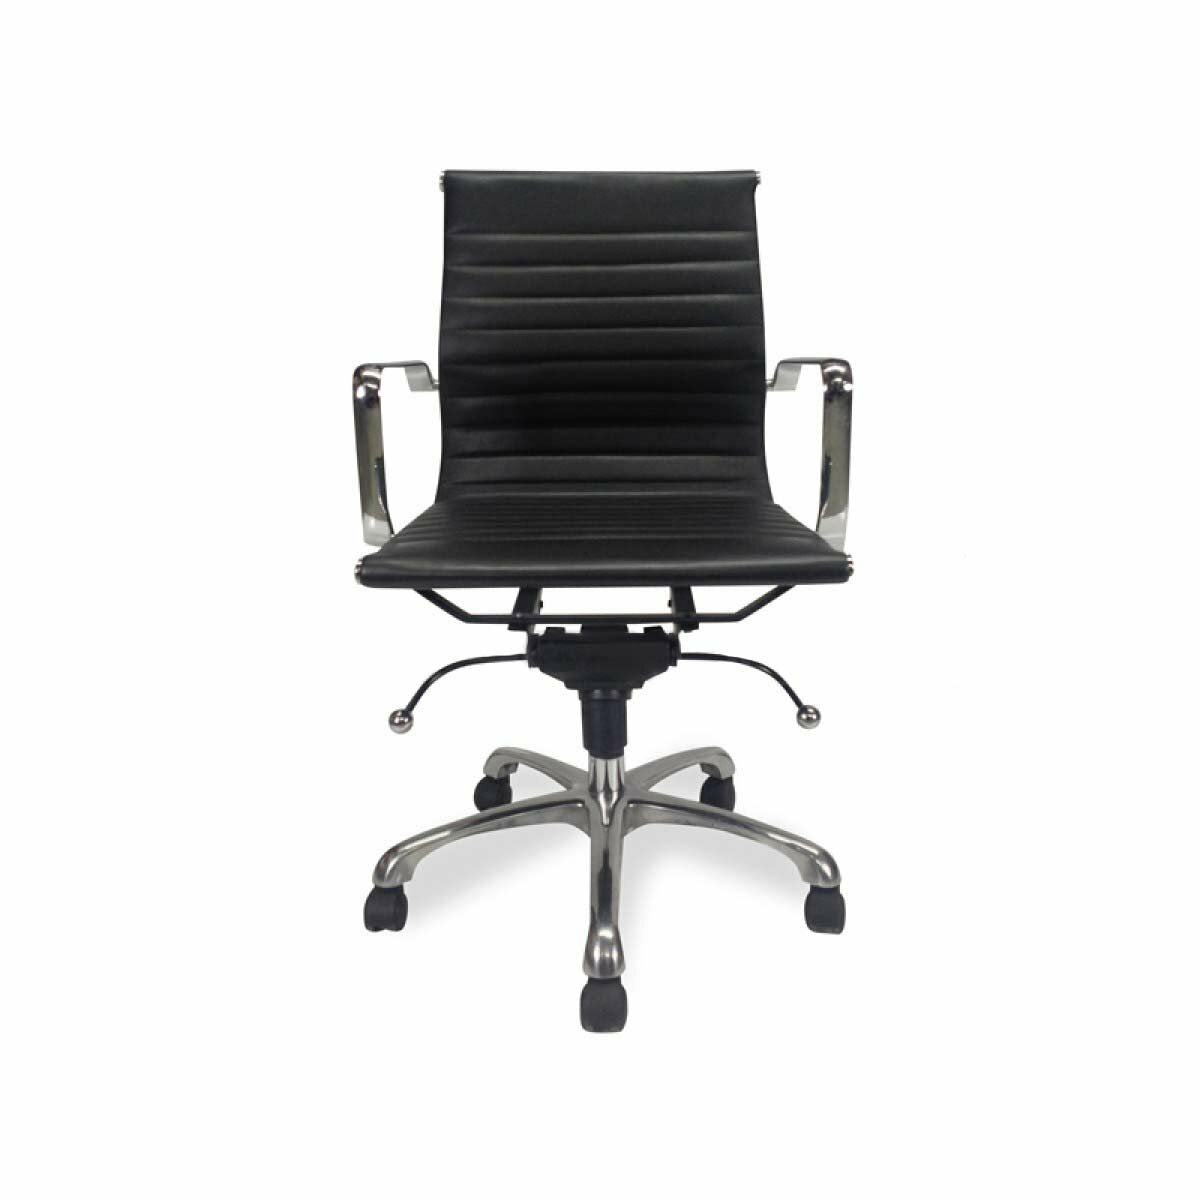 Veera Leather Office Chair - Black